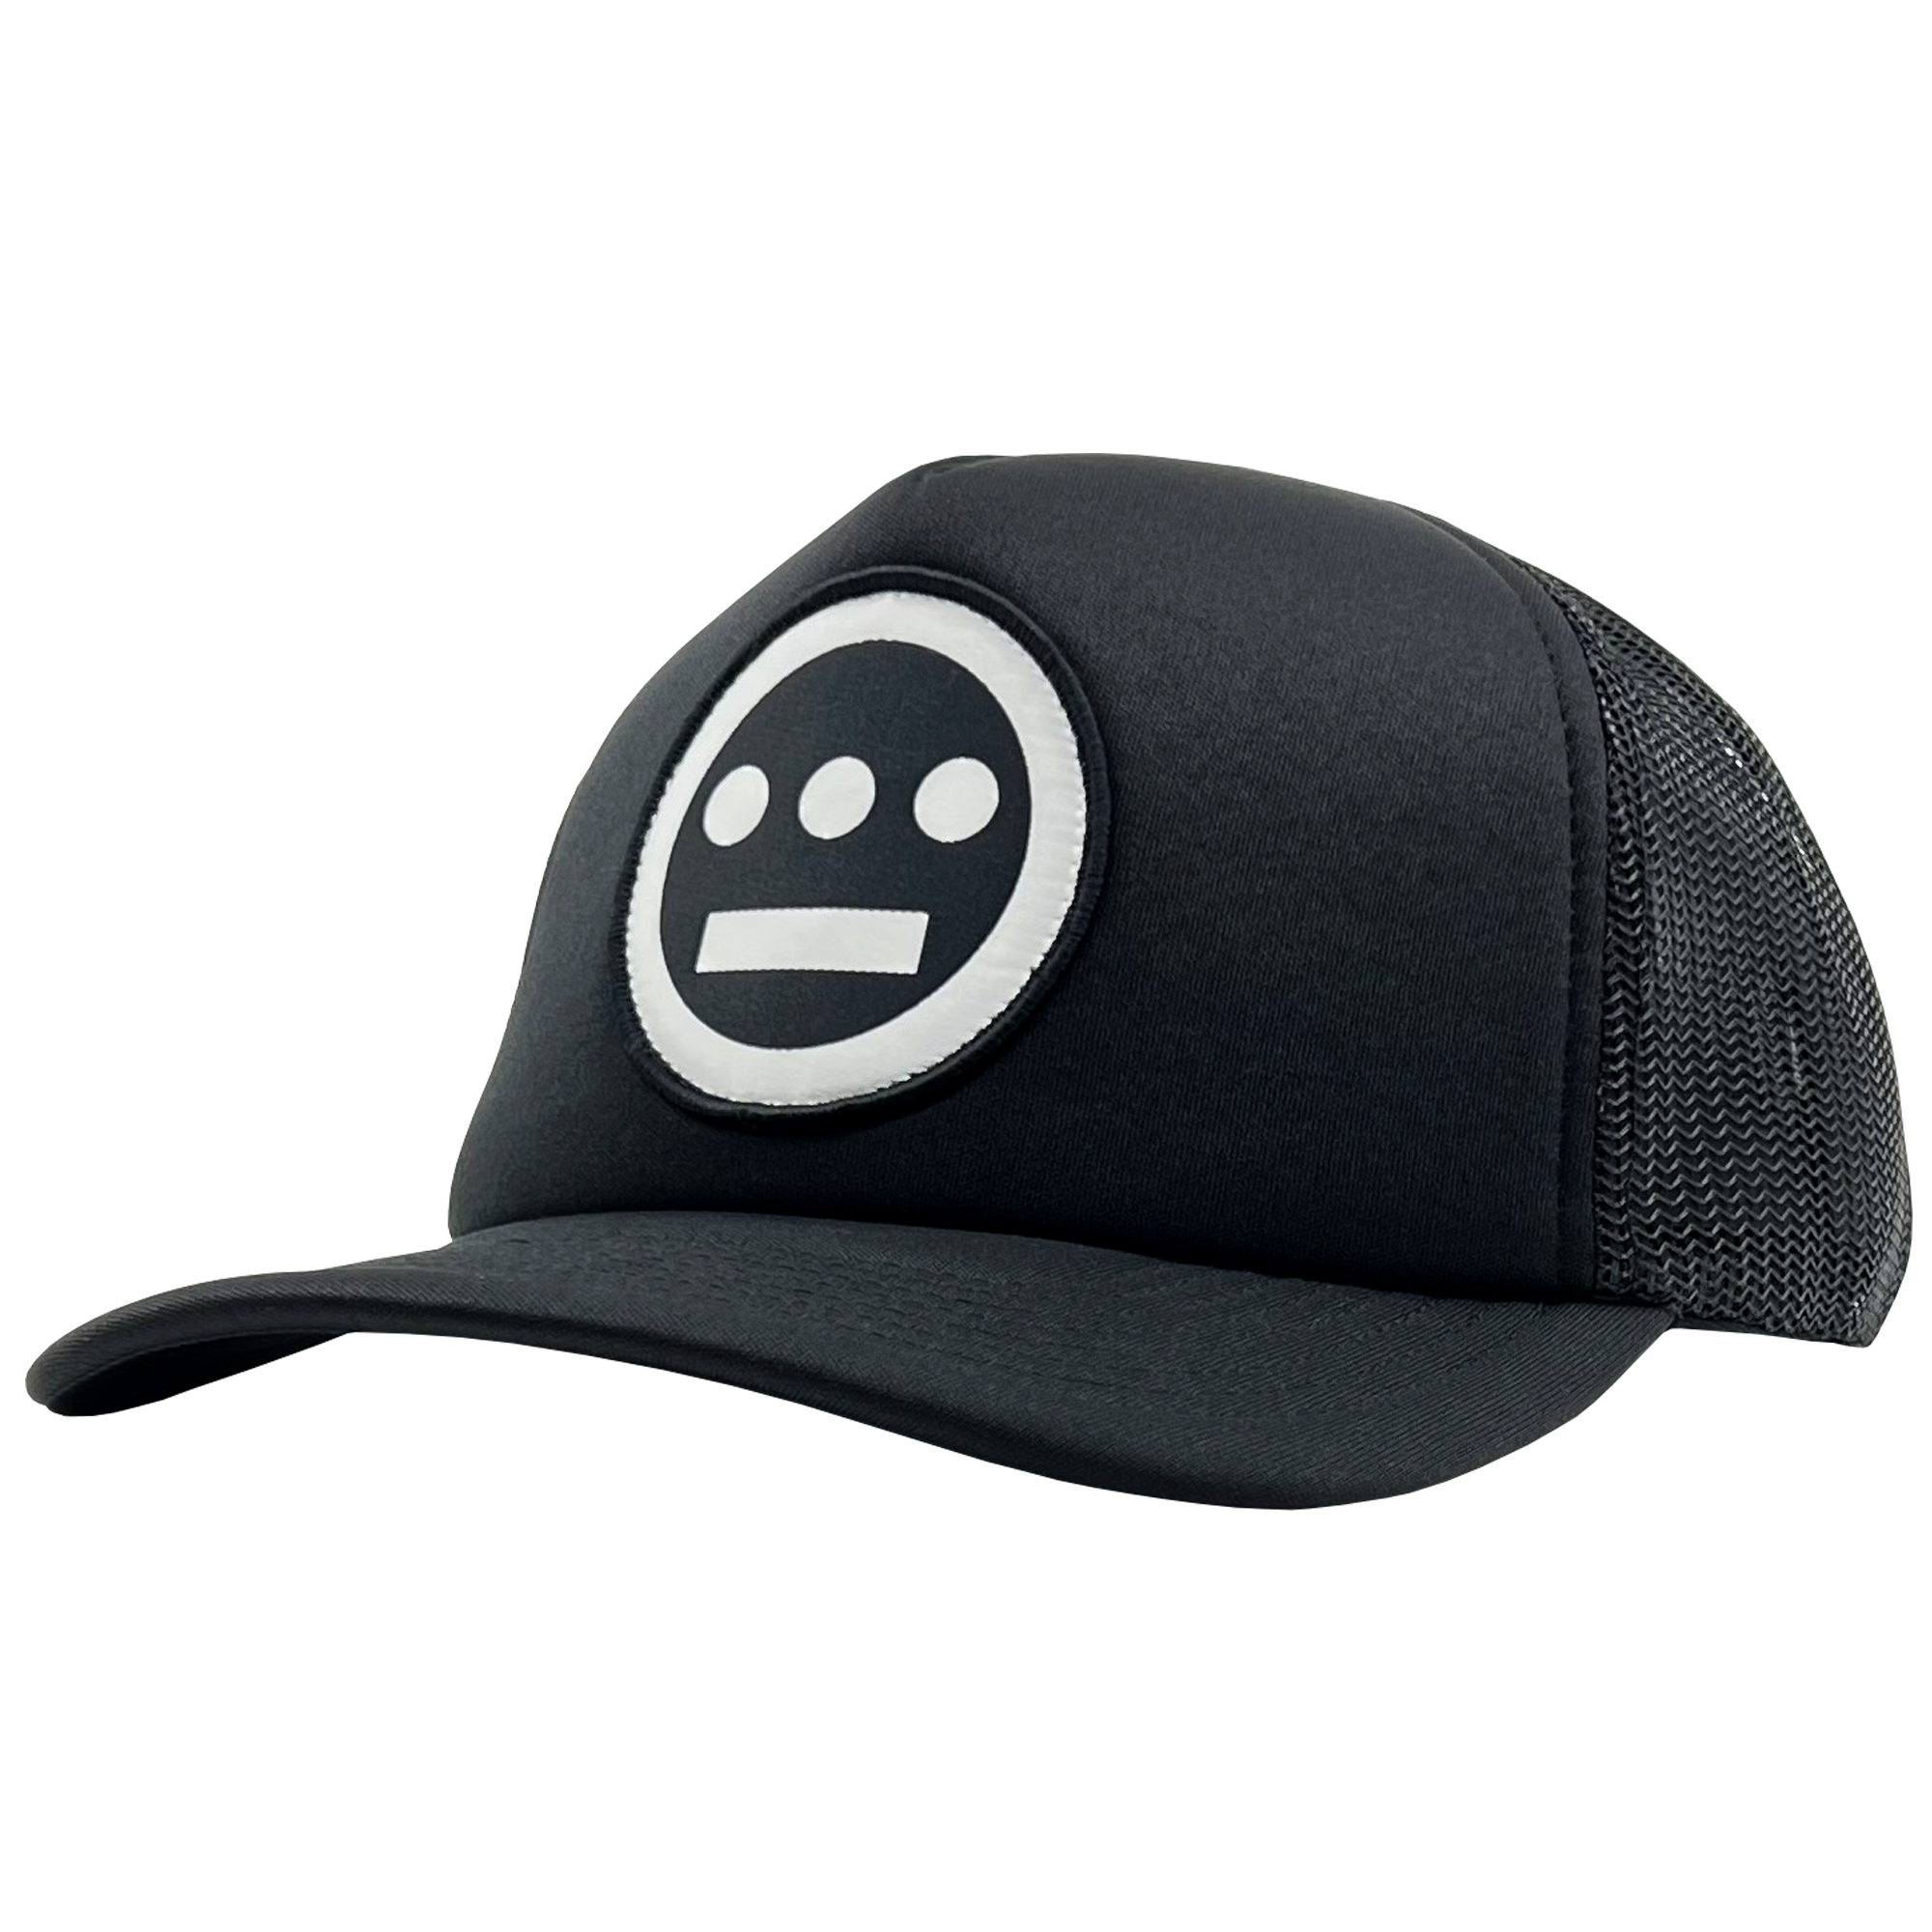 Side view of black Mitchell & Ness snapback truckers cap with white Hiero Hip Hop crew logo.